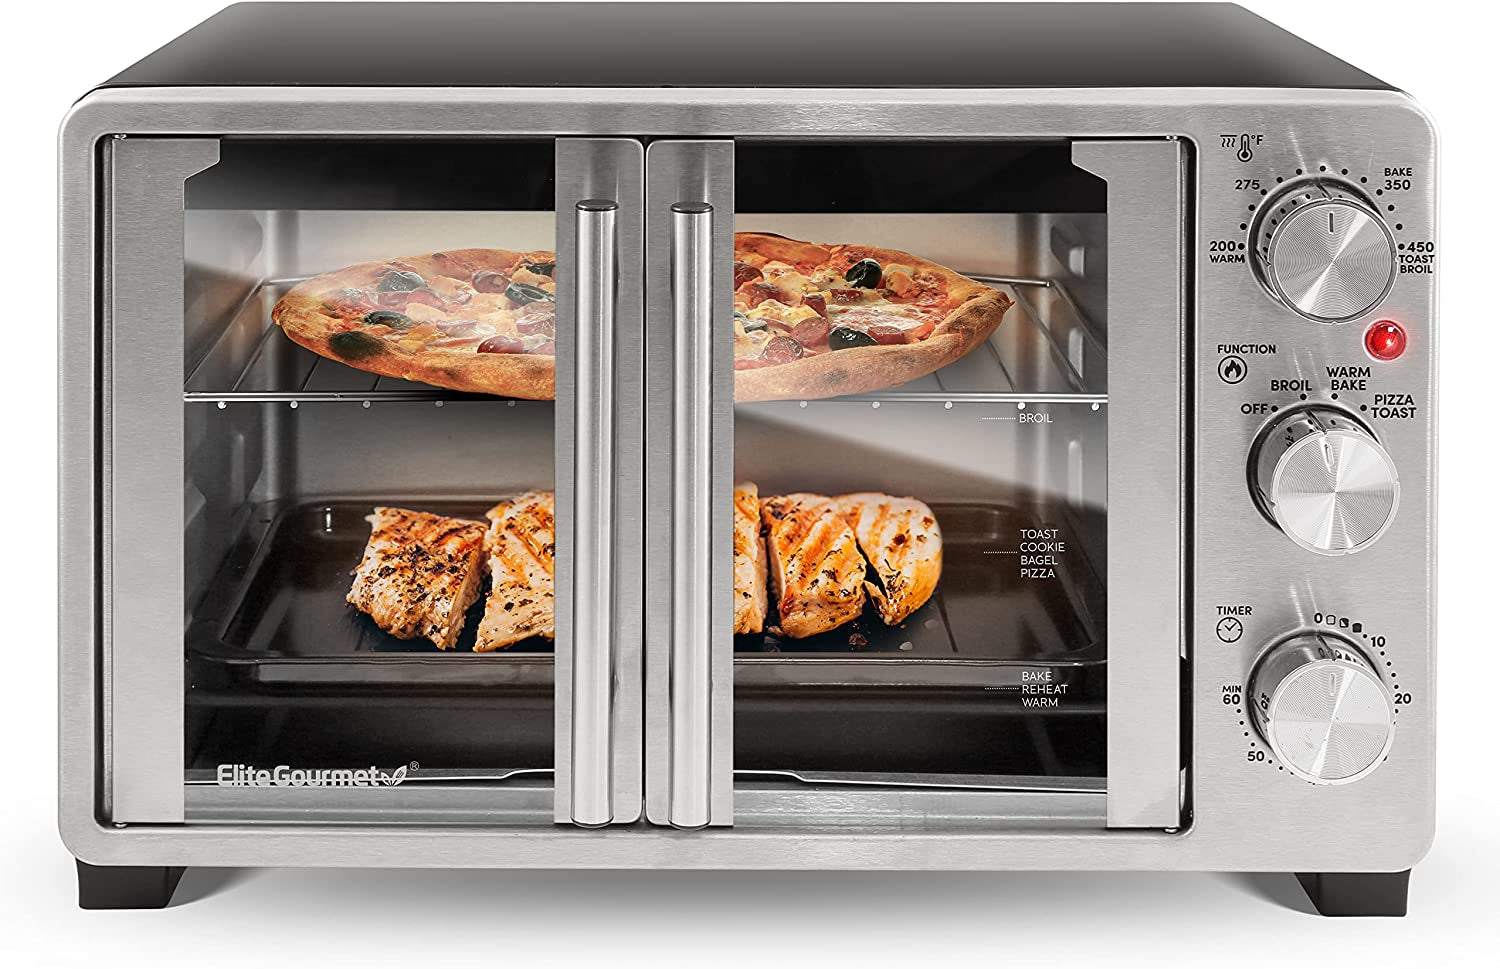 EG Stainless Steel & Black 25L Capacity Double French Door Countertop Toaster Oven with Bake, Broil, Toast, and Keep Warm Functions - Fits 12" Pizza